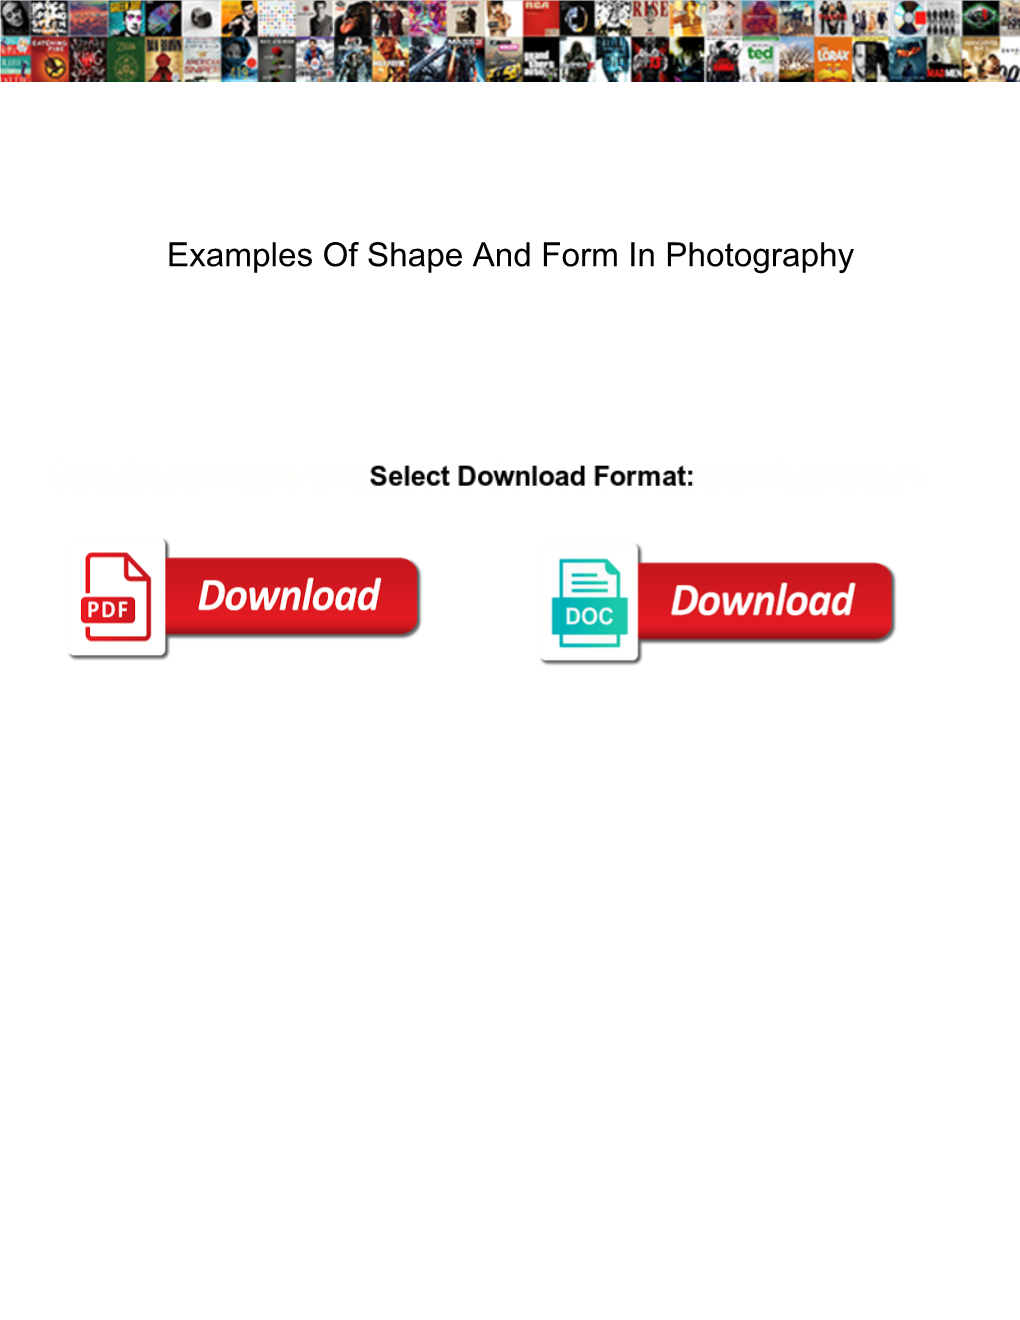 Examples of Shape and Form in Photography